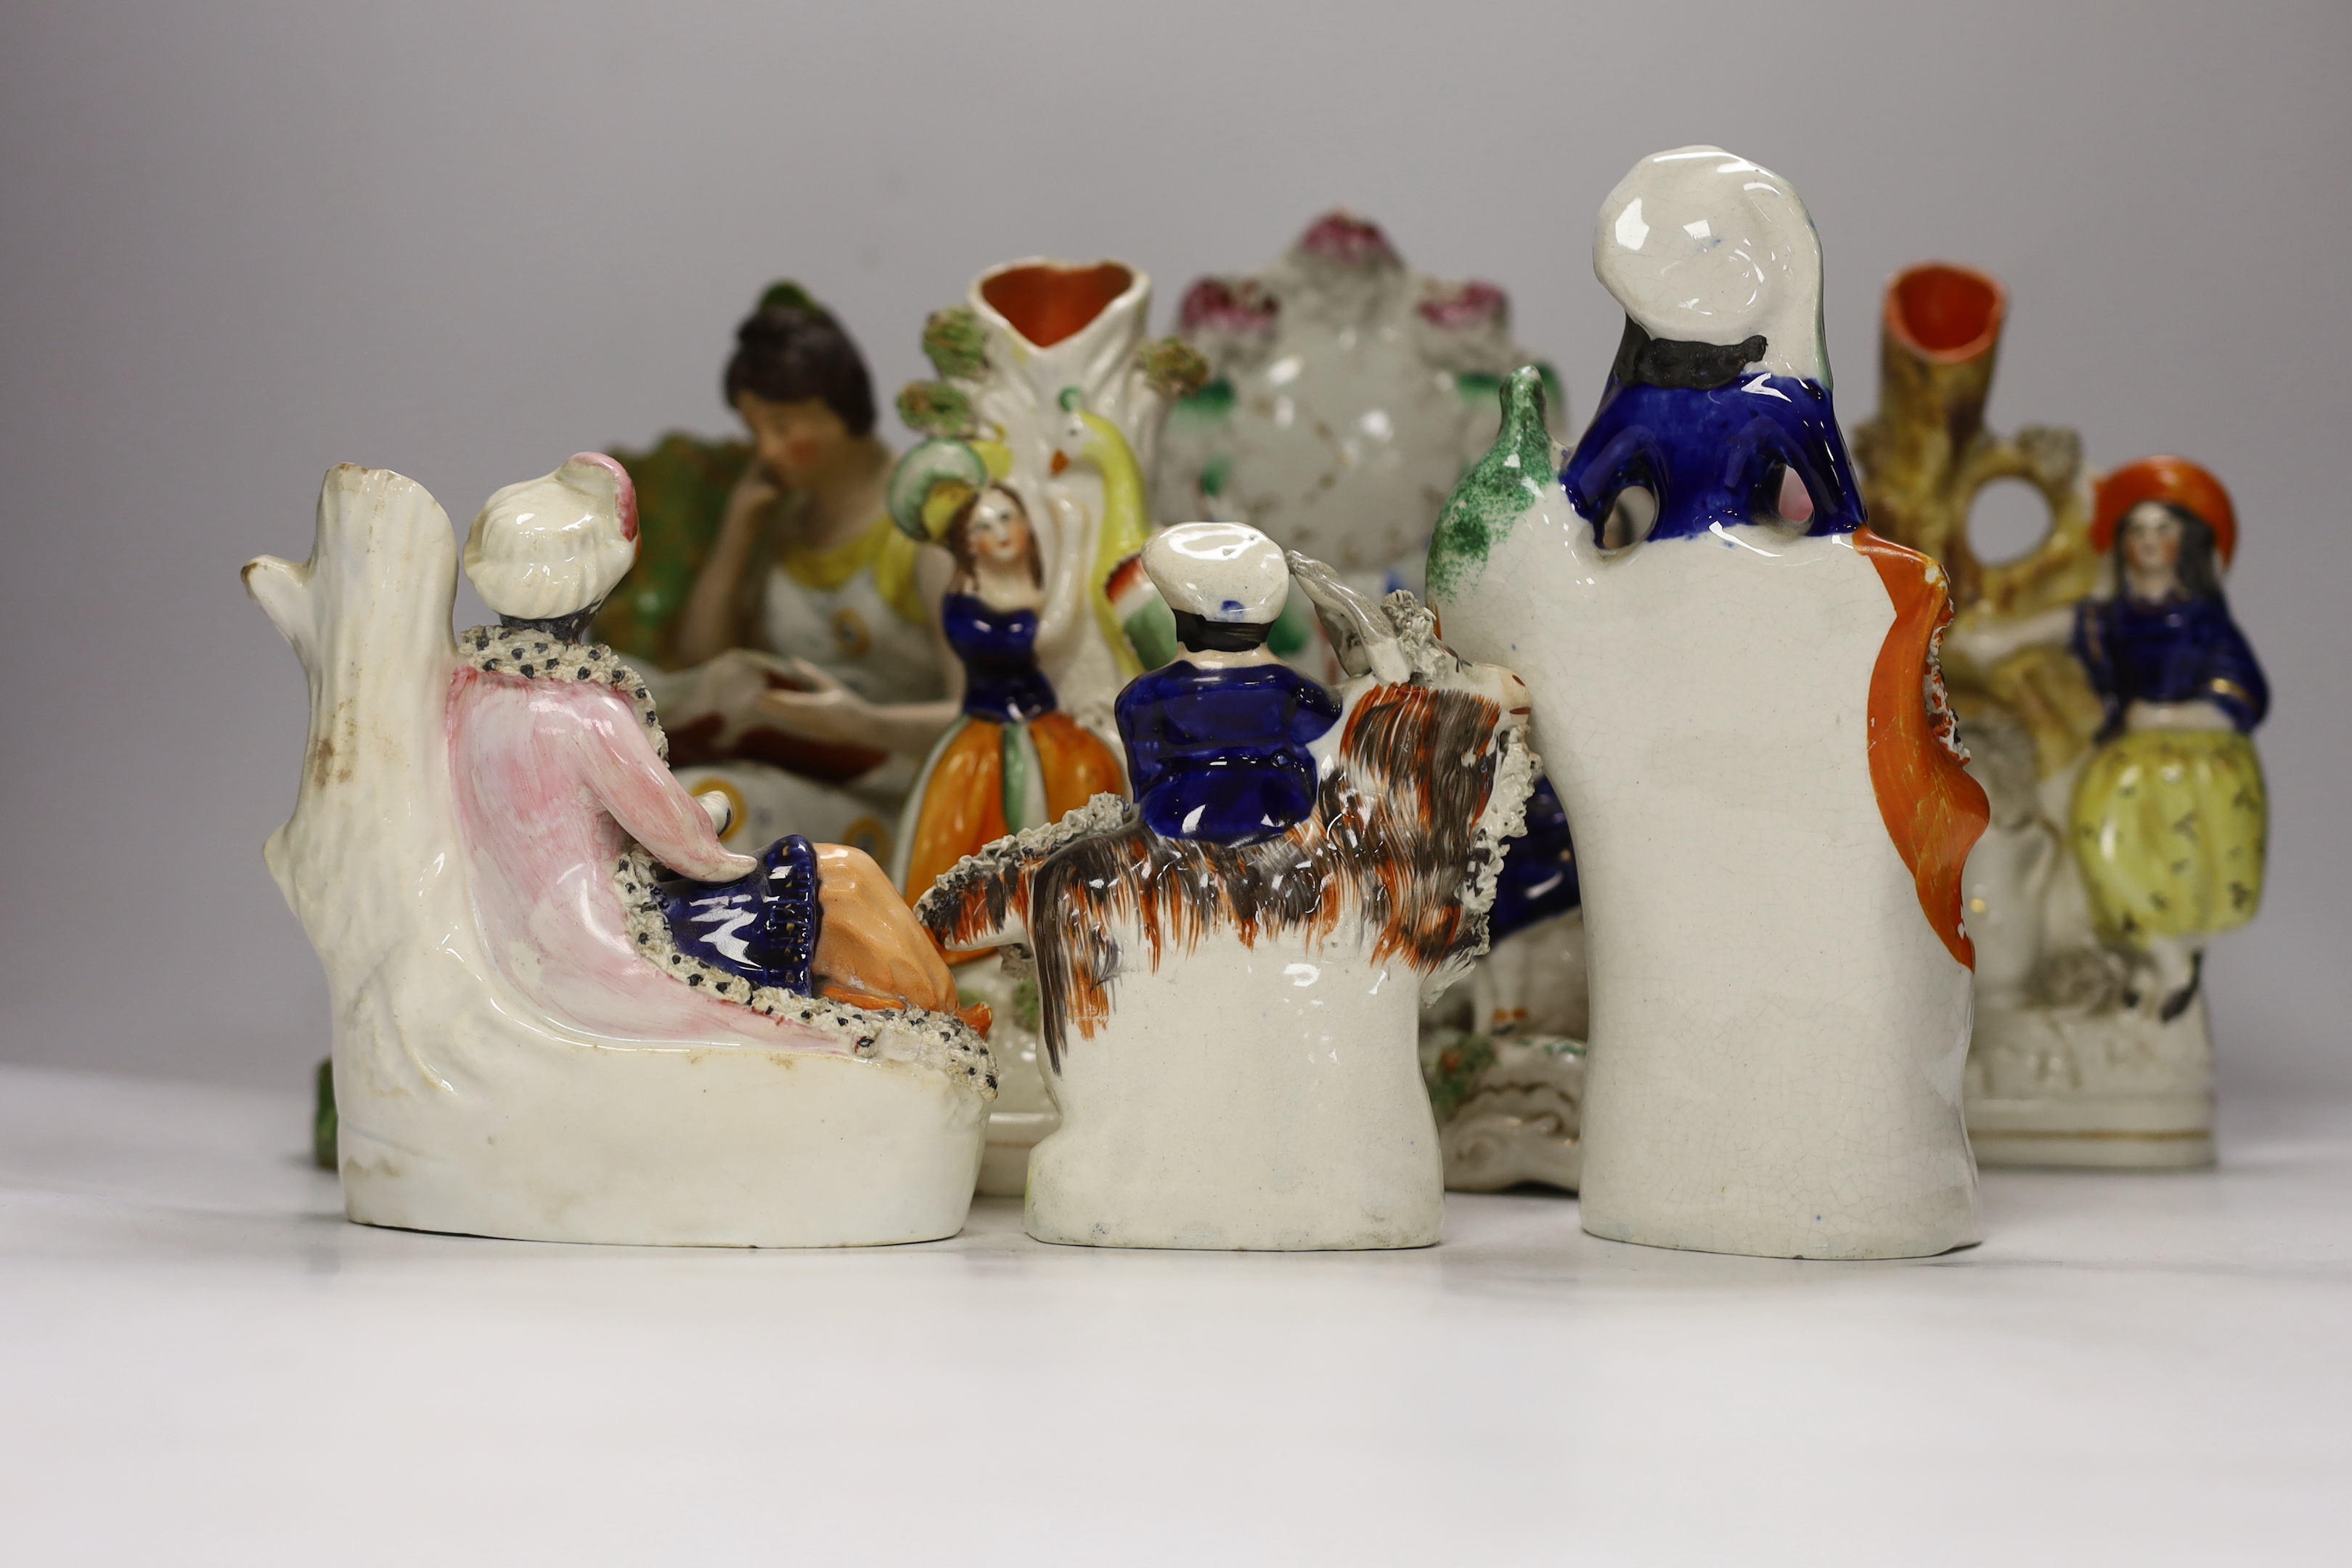 An early 19th century Staffordshire pearlware figure of a seated lady and seven mid 19th century Staffordshire pottery figures